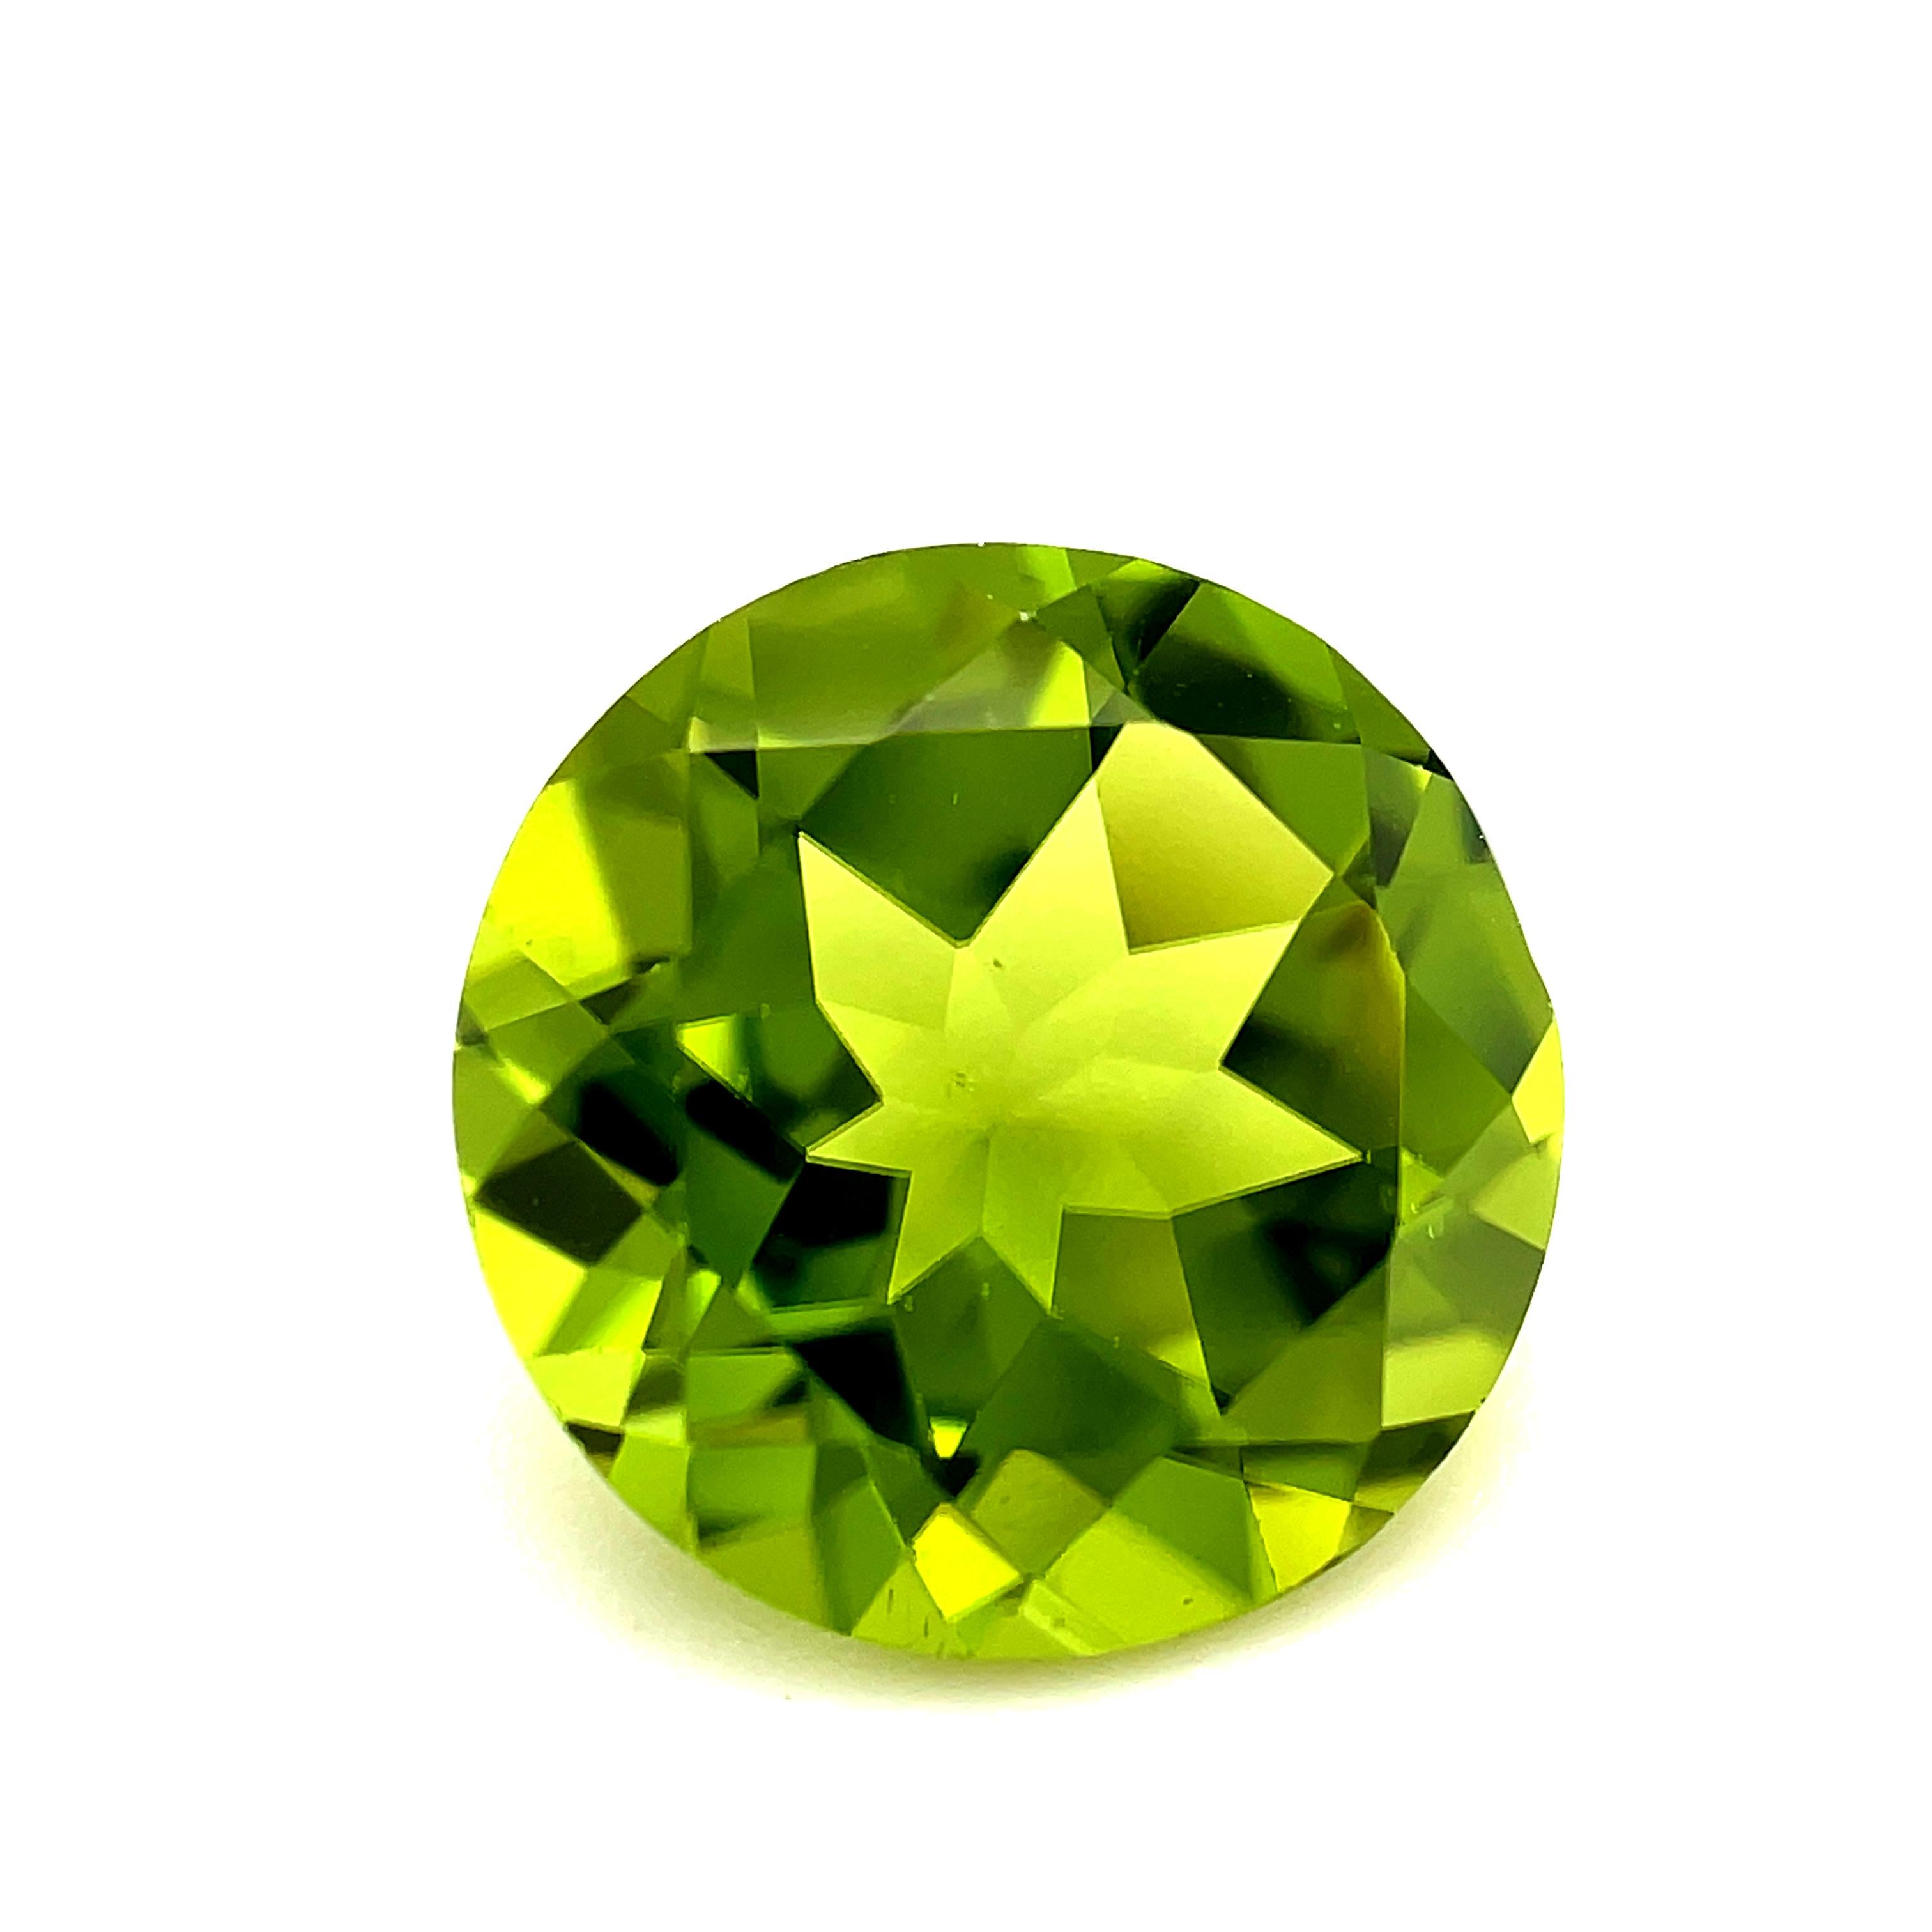 This bright peridot has beautiful, open color and is so lively! It is an ideal apple green color and has exceptional clarity. Measuring 11.02 x 10.97 x 6.25 millimeters, it is a well proportioned, well cut round, offering great versatility for